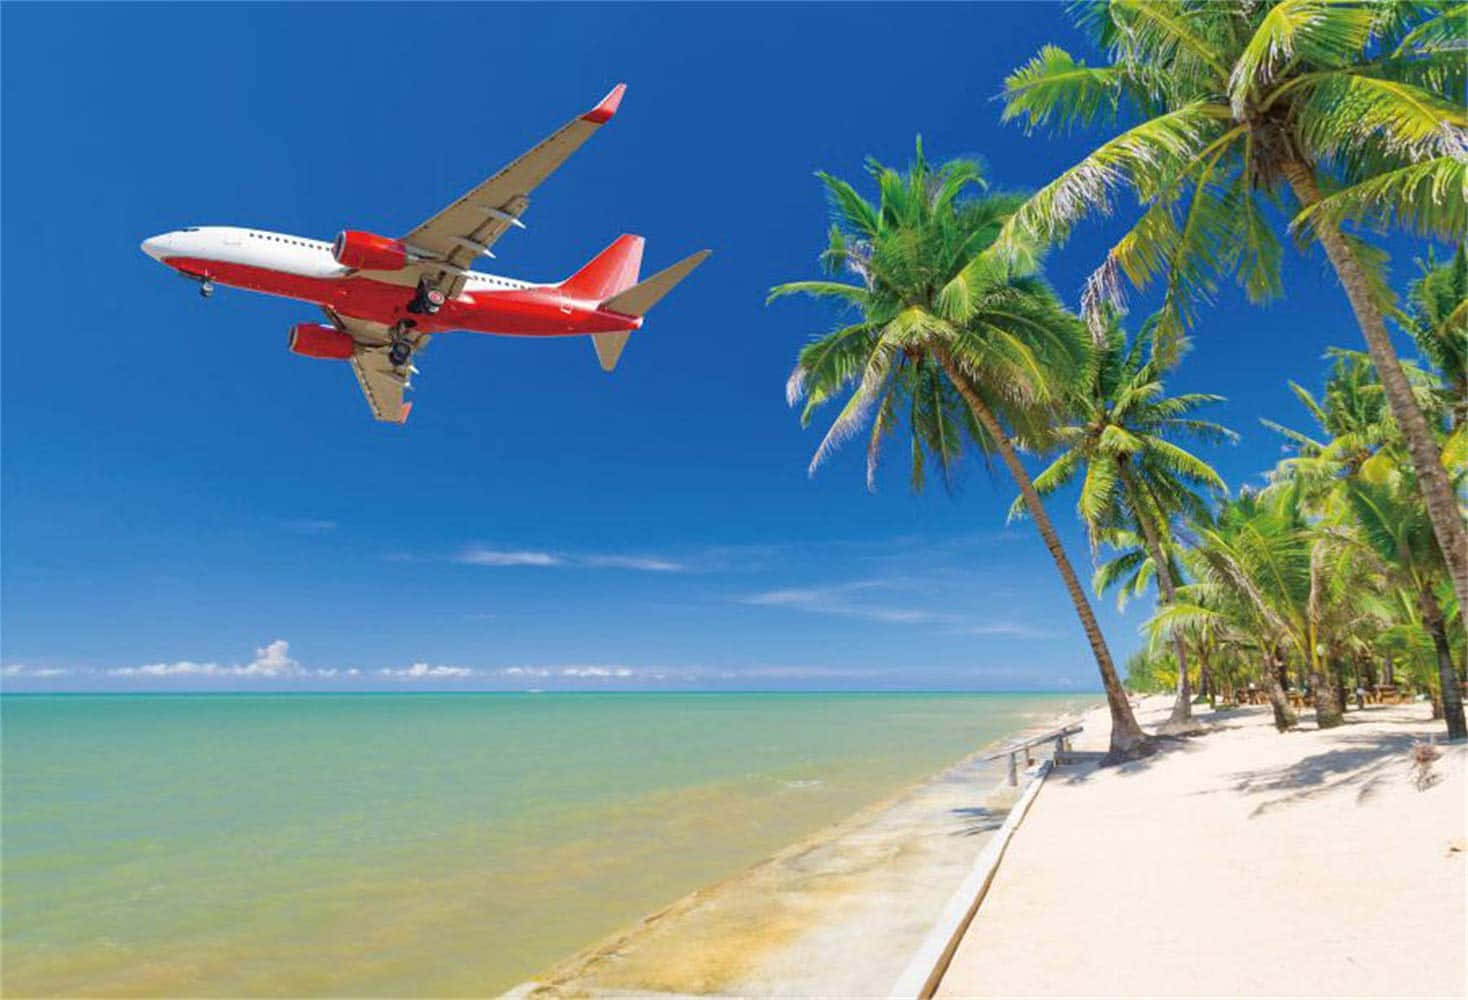 Red And White Small Airplane Flies Over Beach Wallpaper